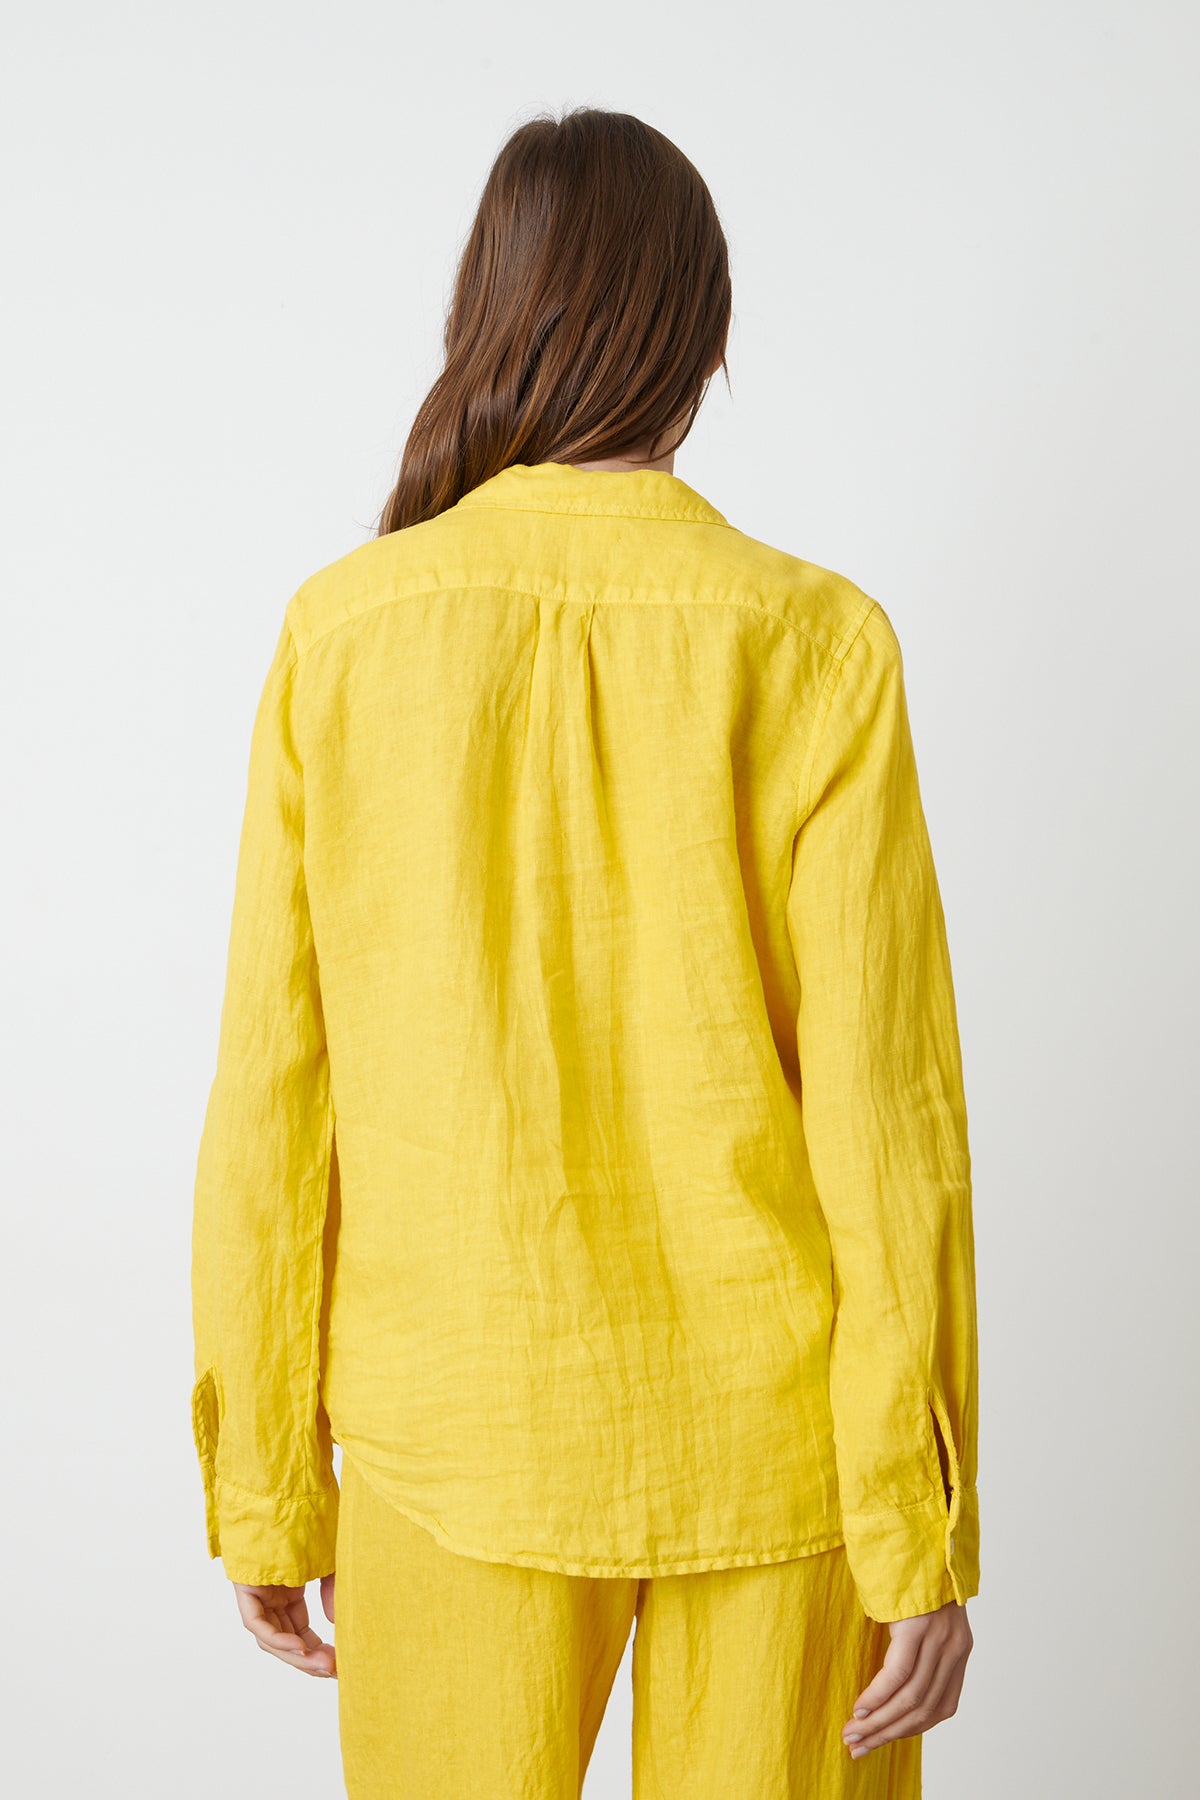 Natalia Button-Up Shirt in bright yellow sun colored linen with Lola pant back-26255711404225